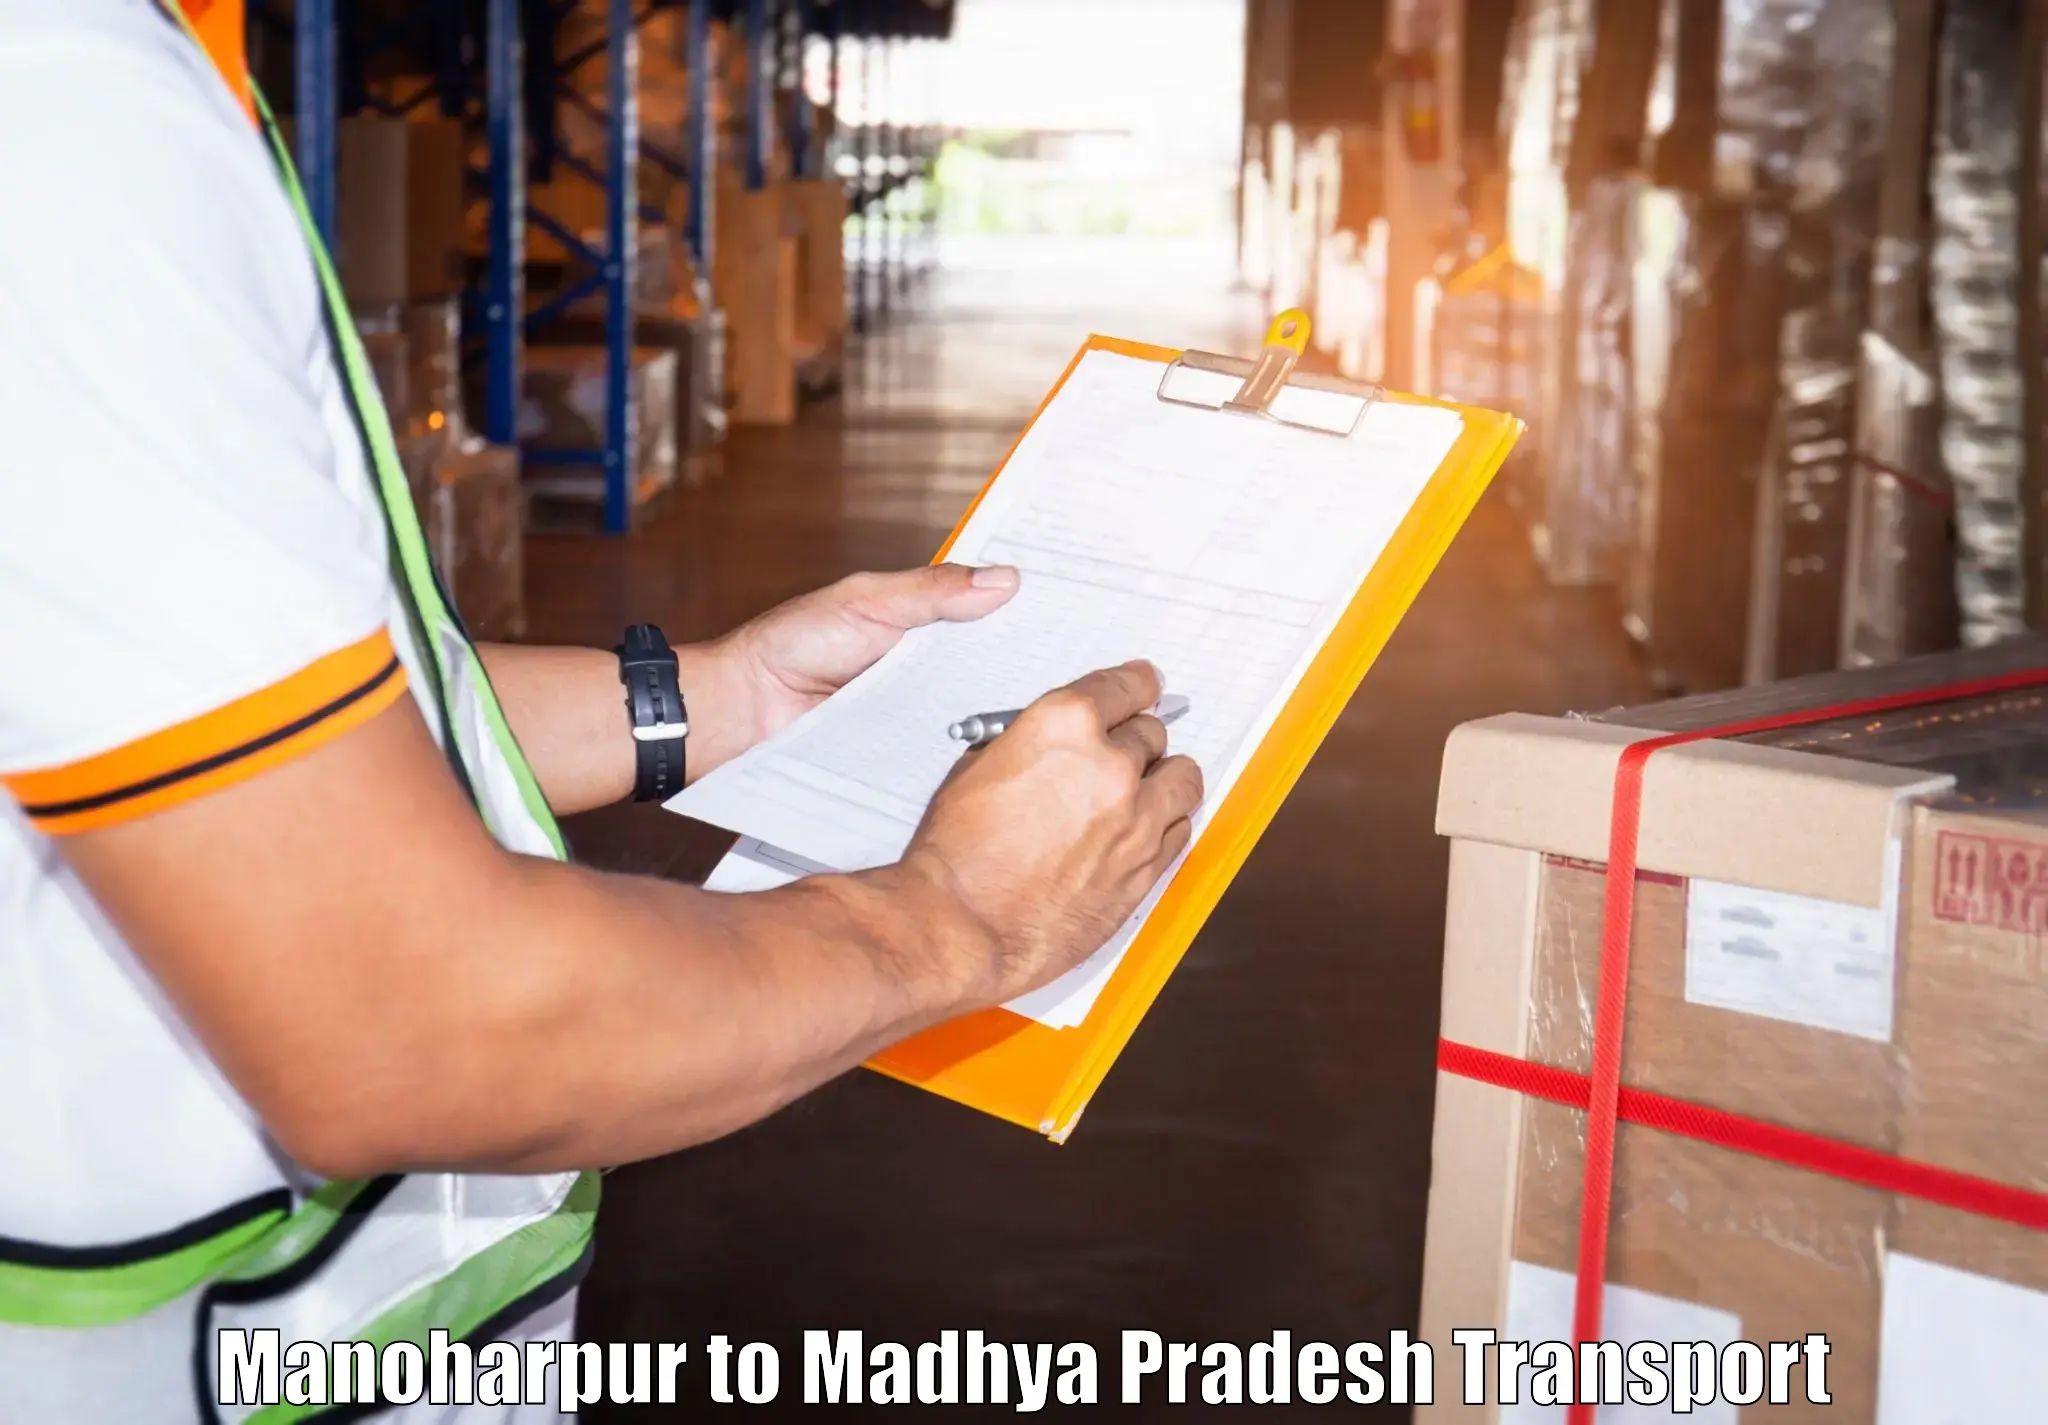 Air cargo transport services in Manoharpur to Begumganj